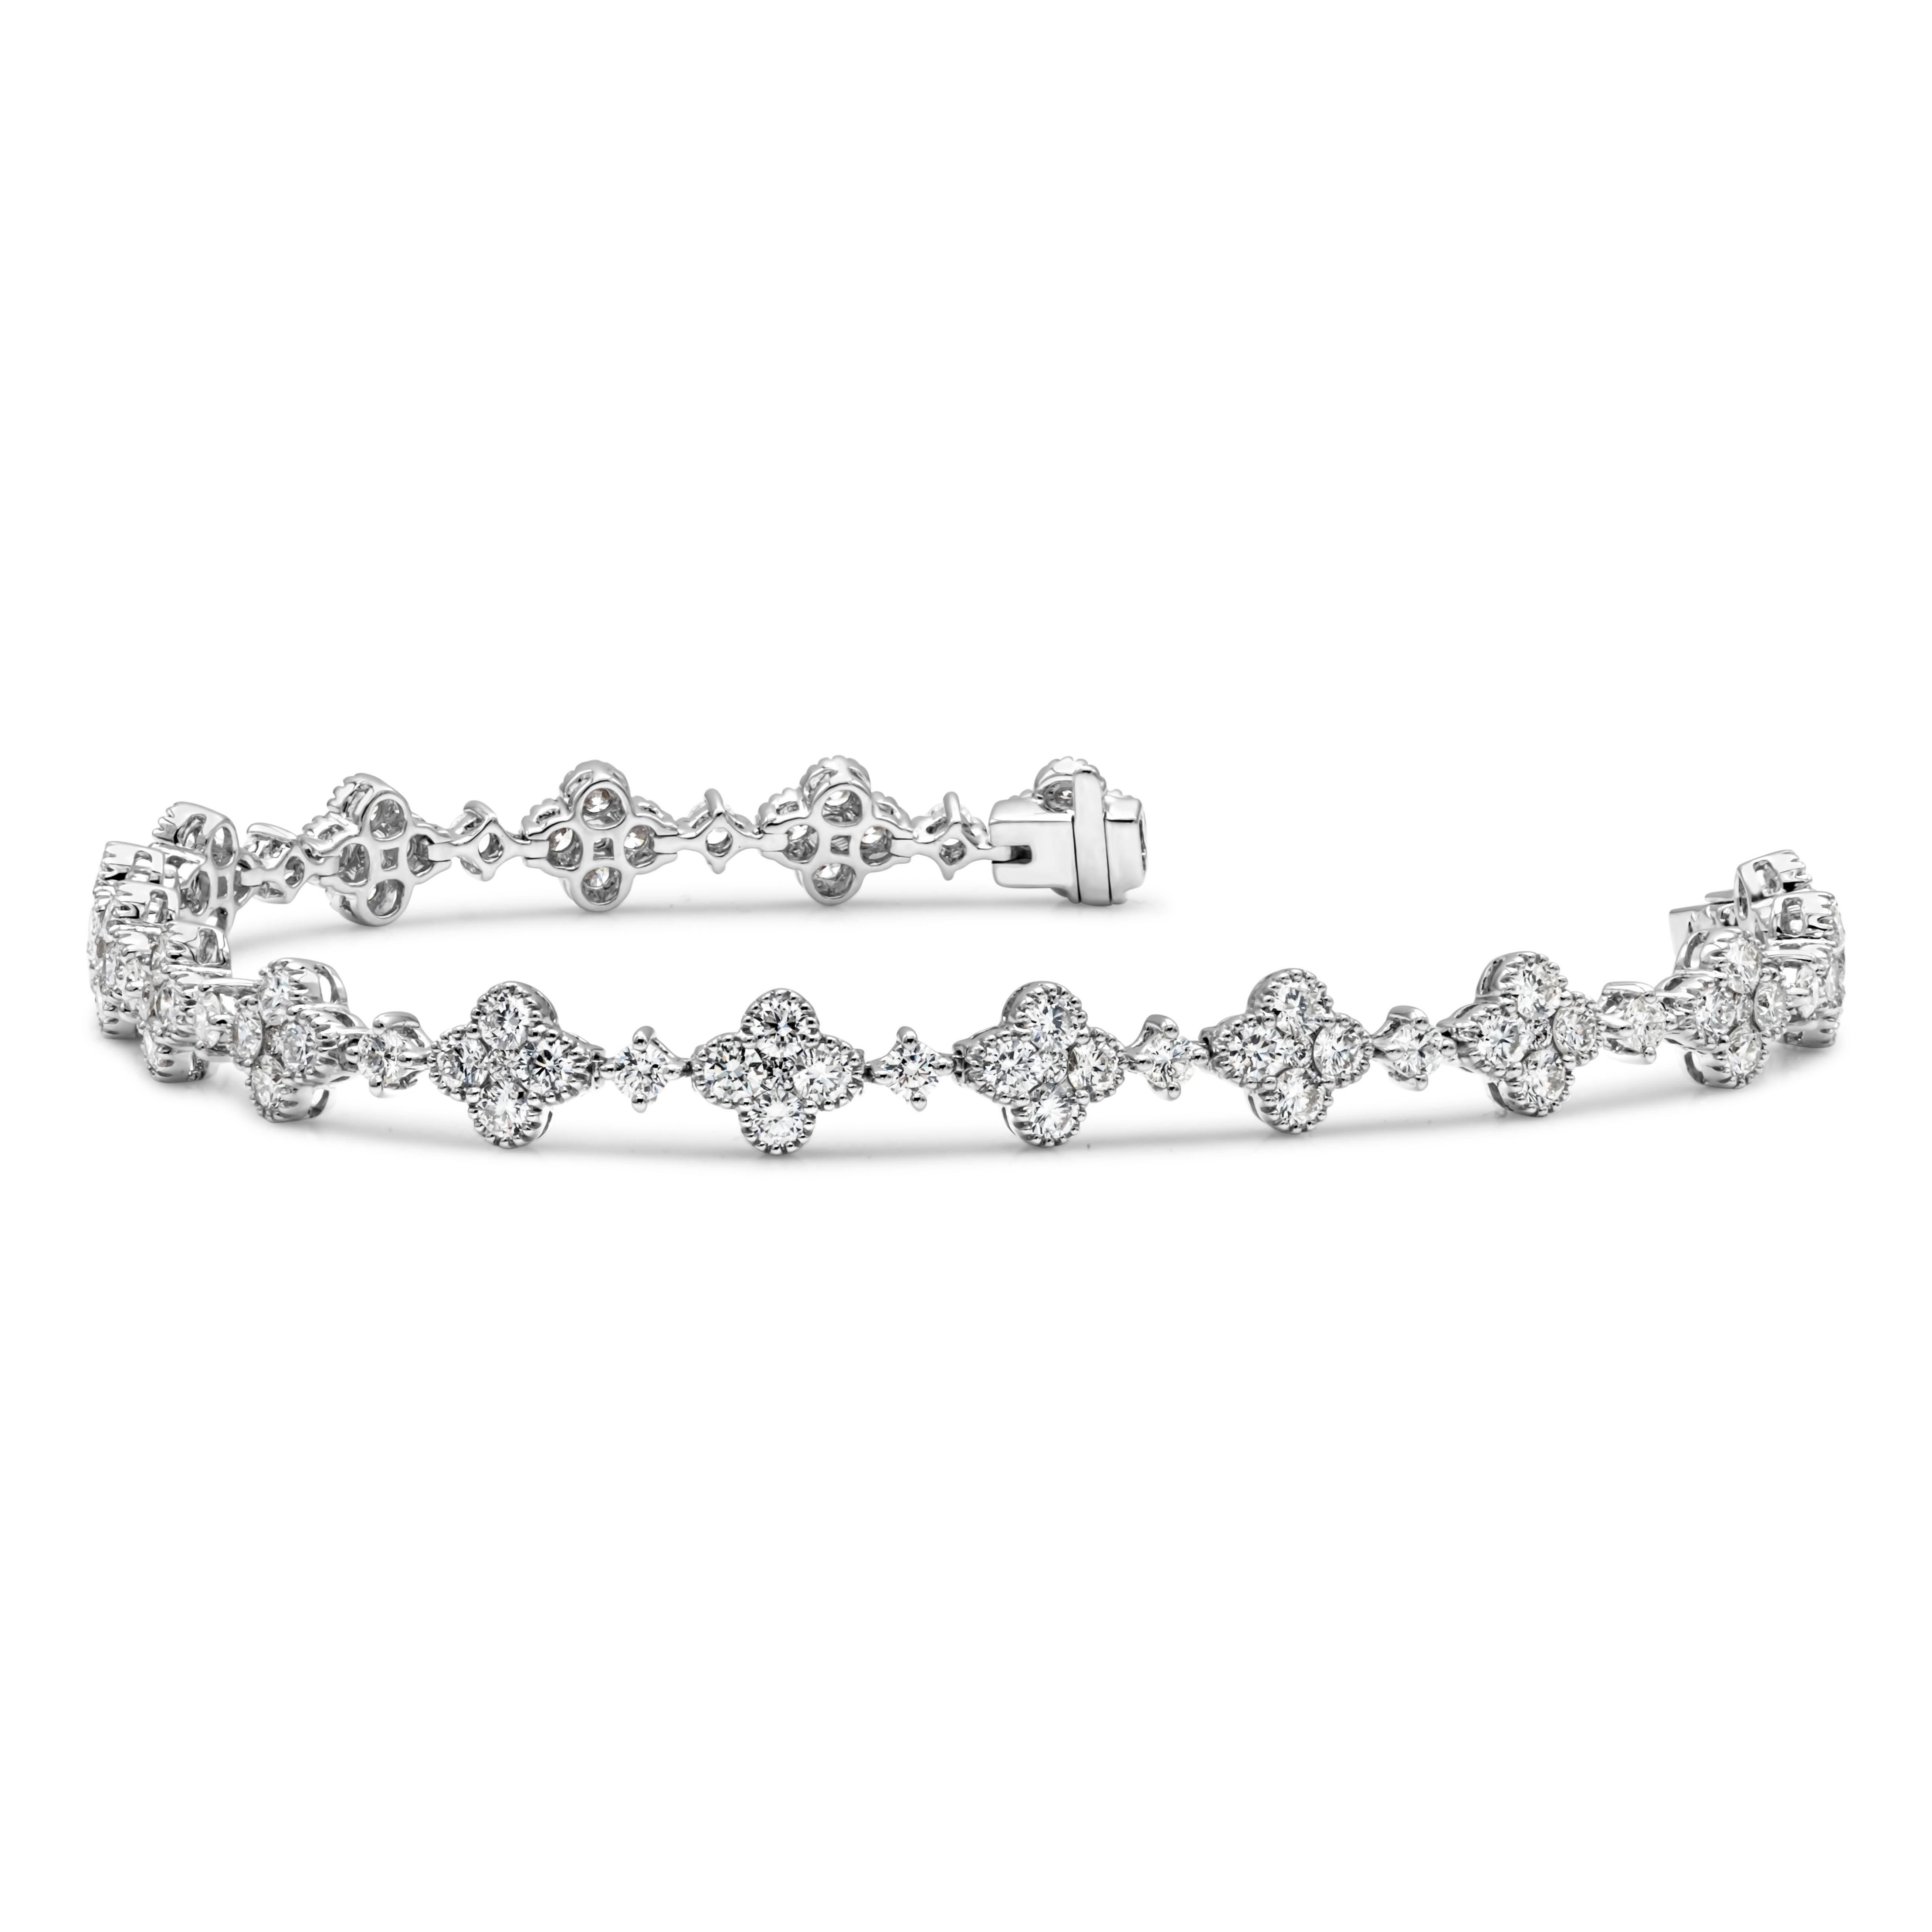 A simple yet lovely tennis bracelet showcasing a 102 brilliant round cut diamond set in a beautiful lotus floral-motif design weighing 4.63 carats total, G color, VS-SI1 in clarity. Separated by round shape diamond, set in a four prong basket